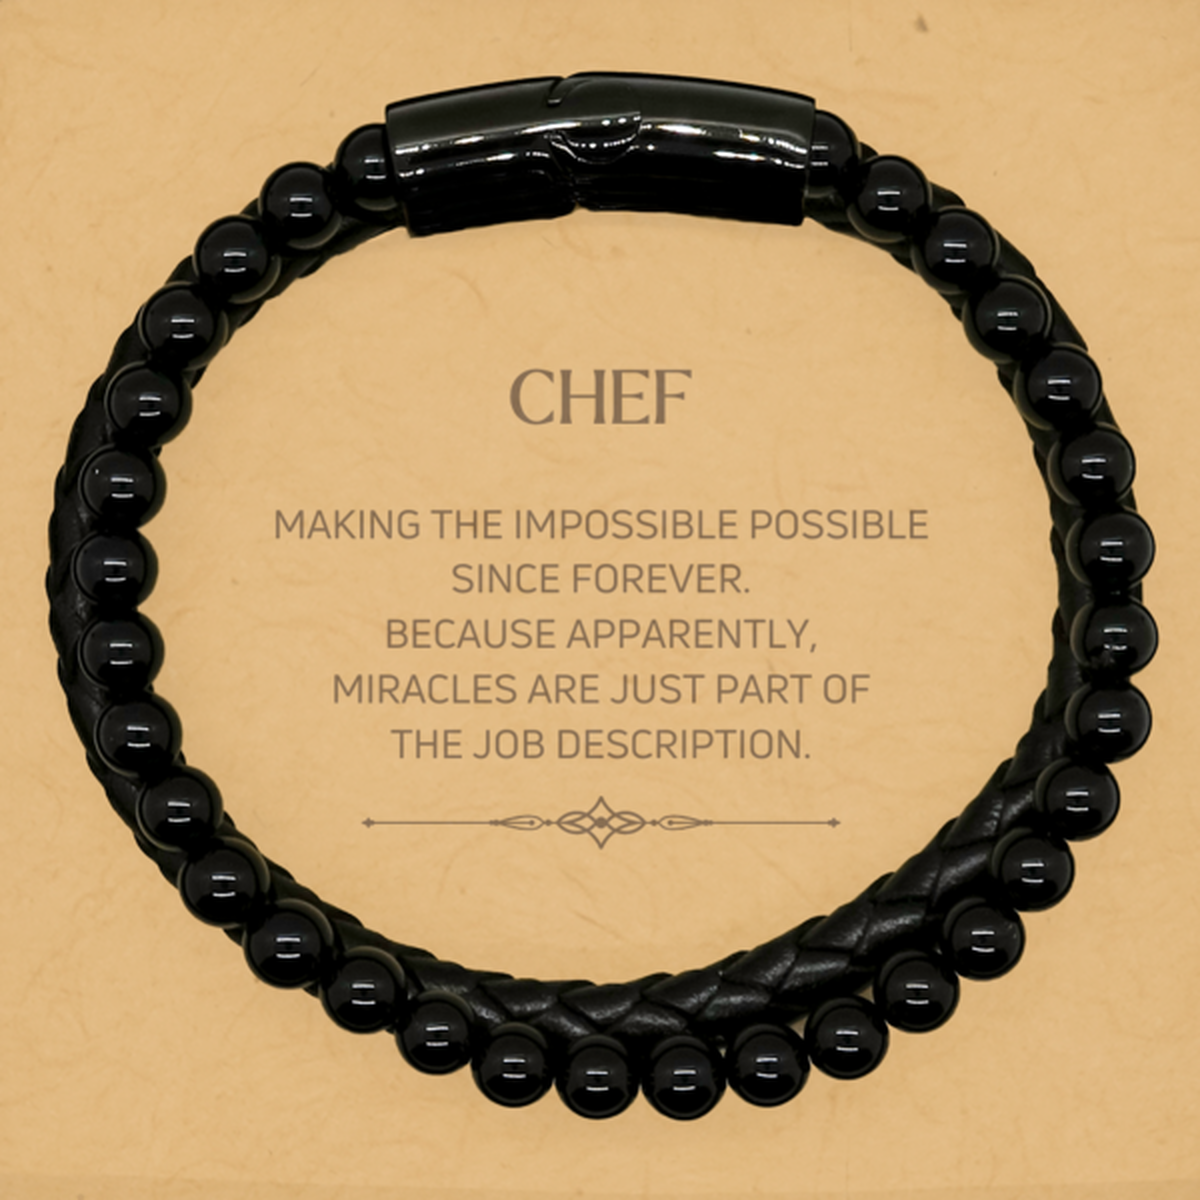 Funny Chef Gifts, Miracles are just part of the job description, Inspirational Birthday Stone Leather Bracelets For Chef, Men, Women, Coworkers, Friends, Boss